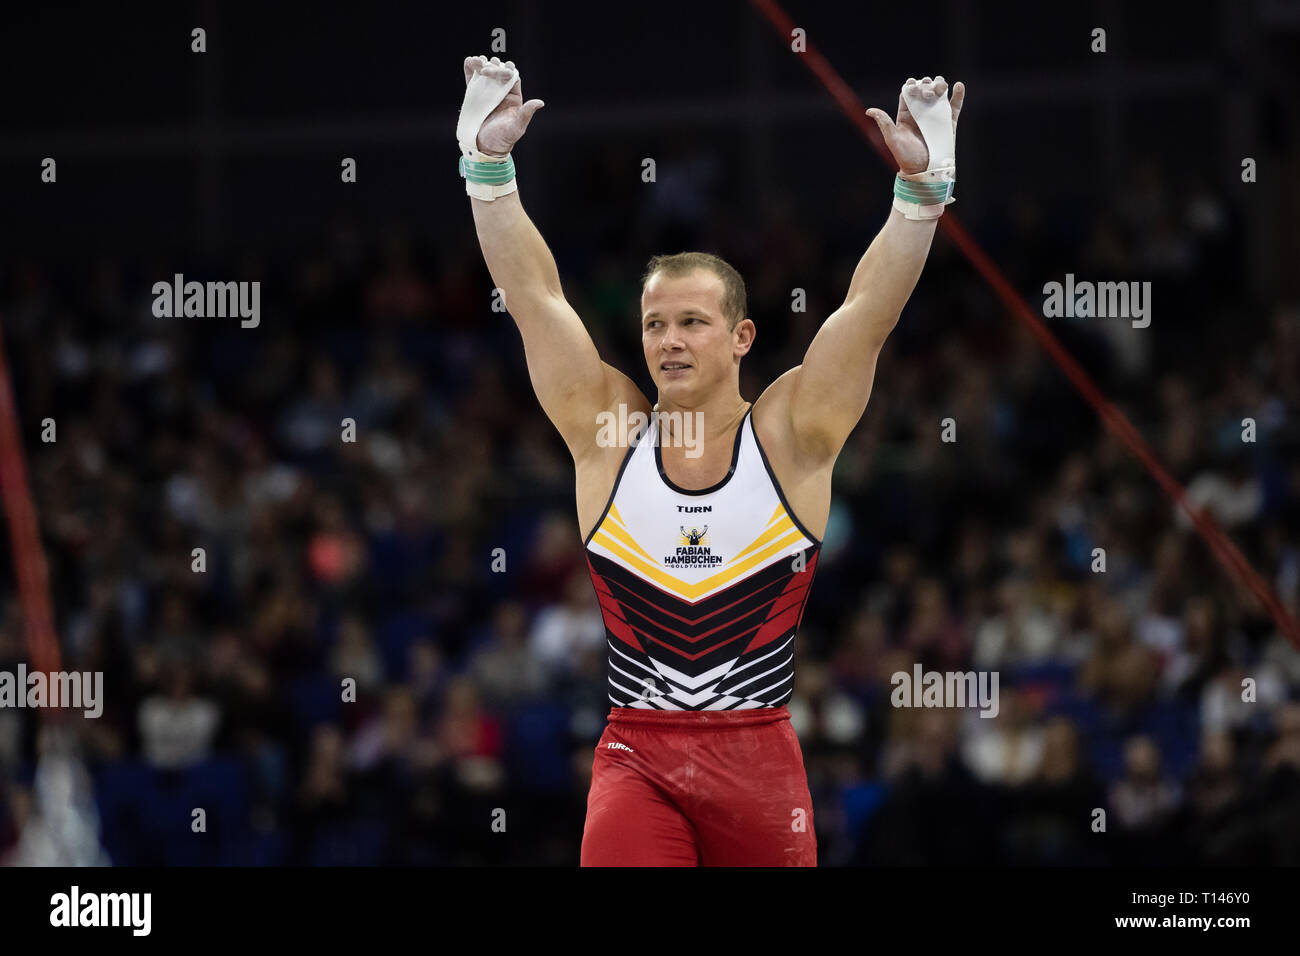 London, UK. 23rd March, 2019. Fabian Hambuchen of Germany performs High Bar during the Matchroom Multisport presents the 2019 Superstars of Gymnastics at The O2 Arena on Saturday, 23 March 2019. LONDON ENGLAND. Credit: Taka G Wu/Alamy News Stock Photo